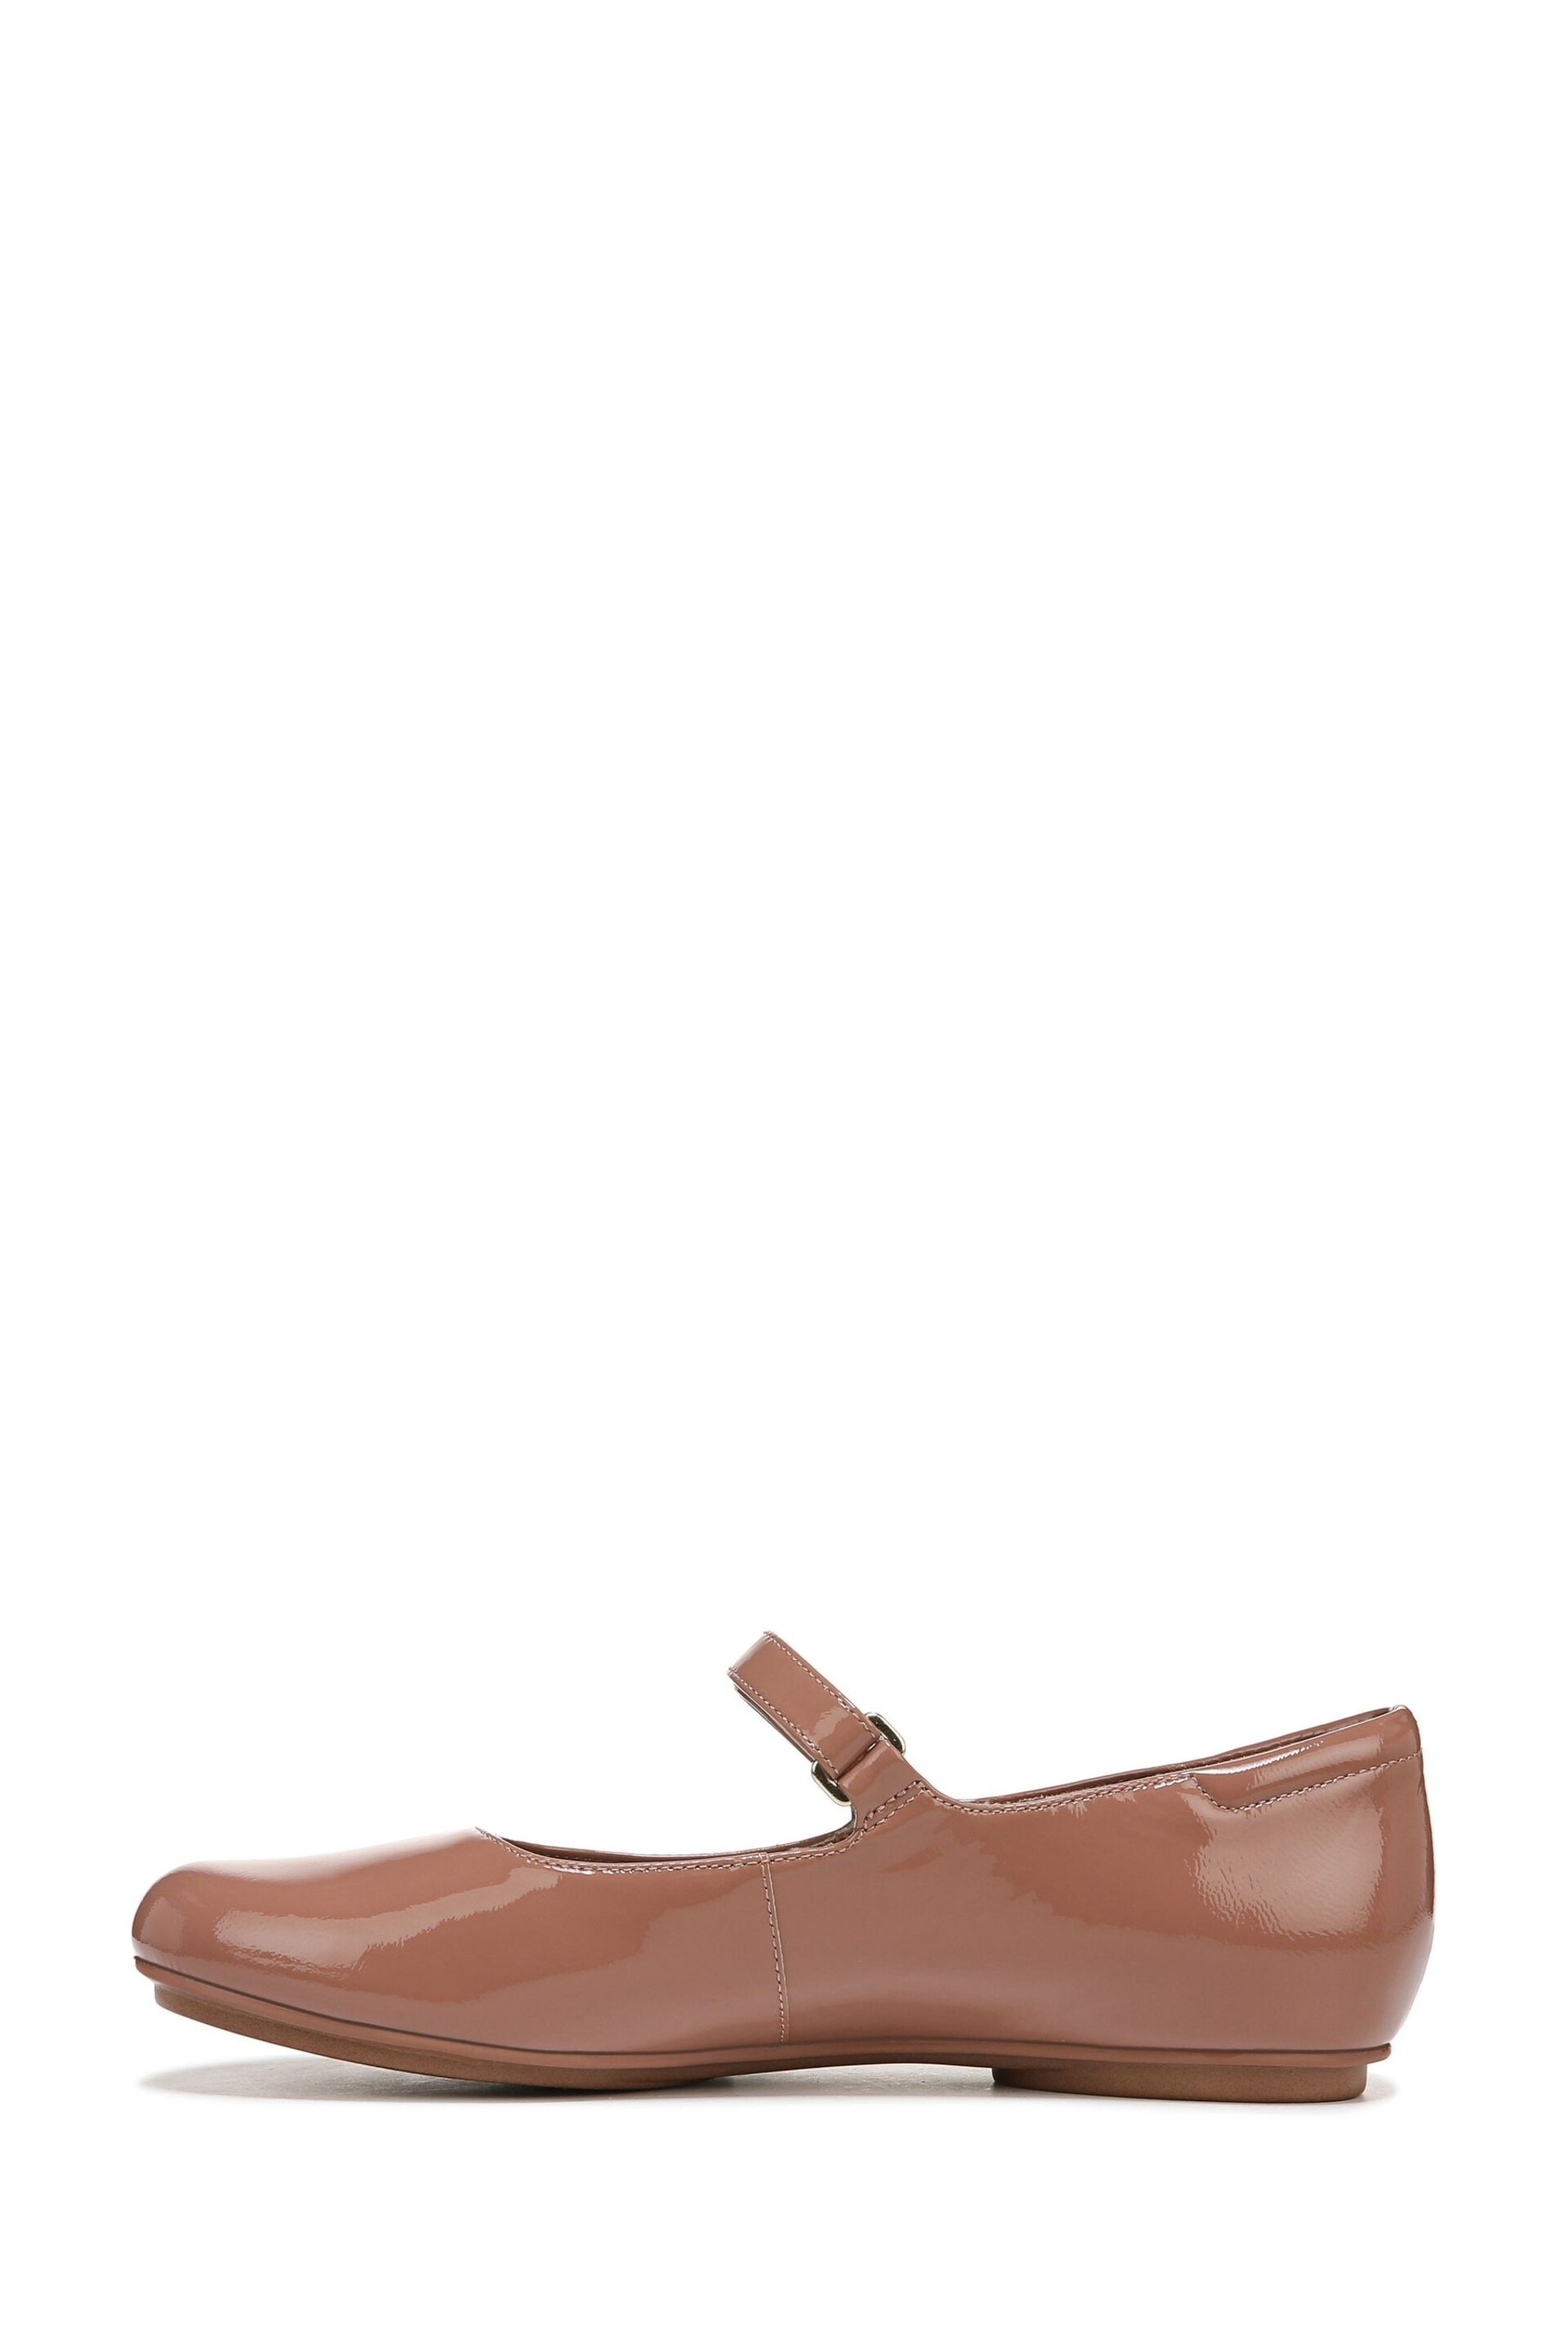 Naturalizer Maxwell Mary Janes Leather Shoes - Image 2 of 7